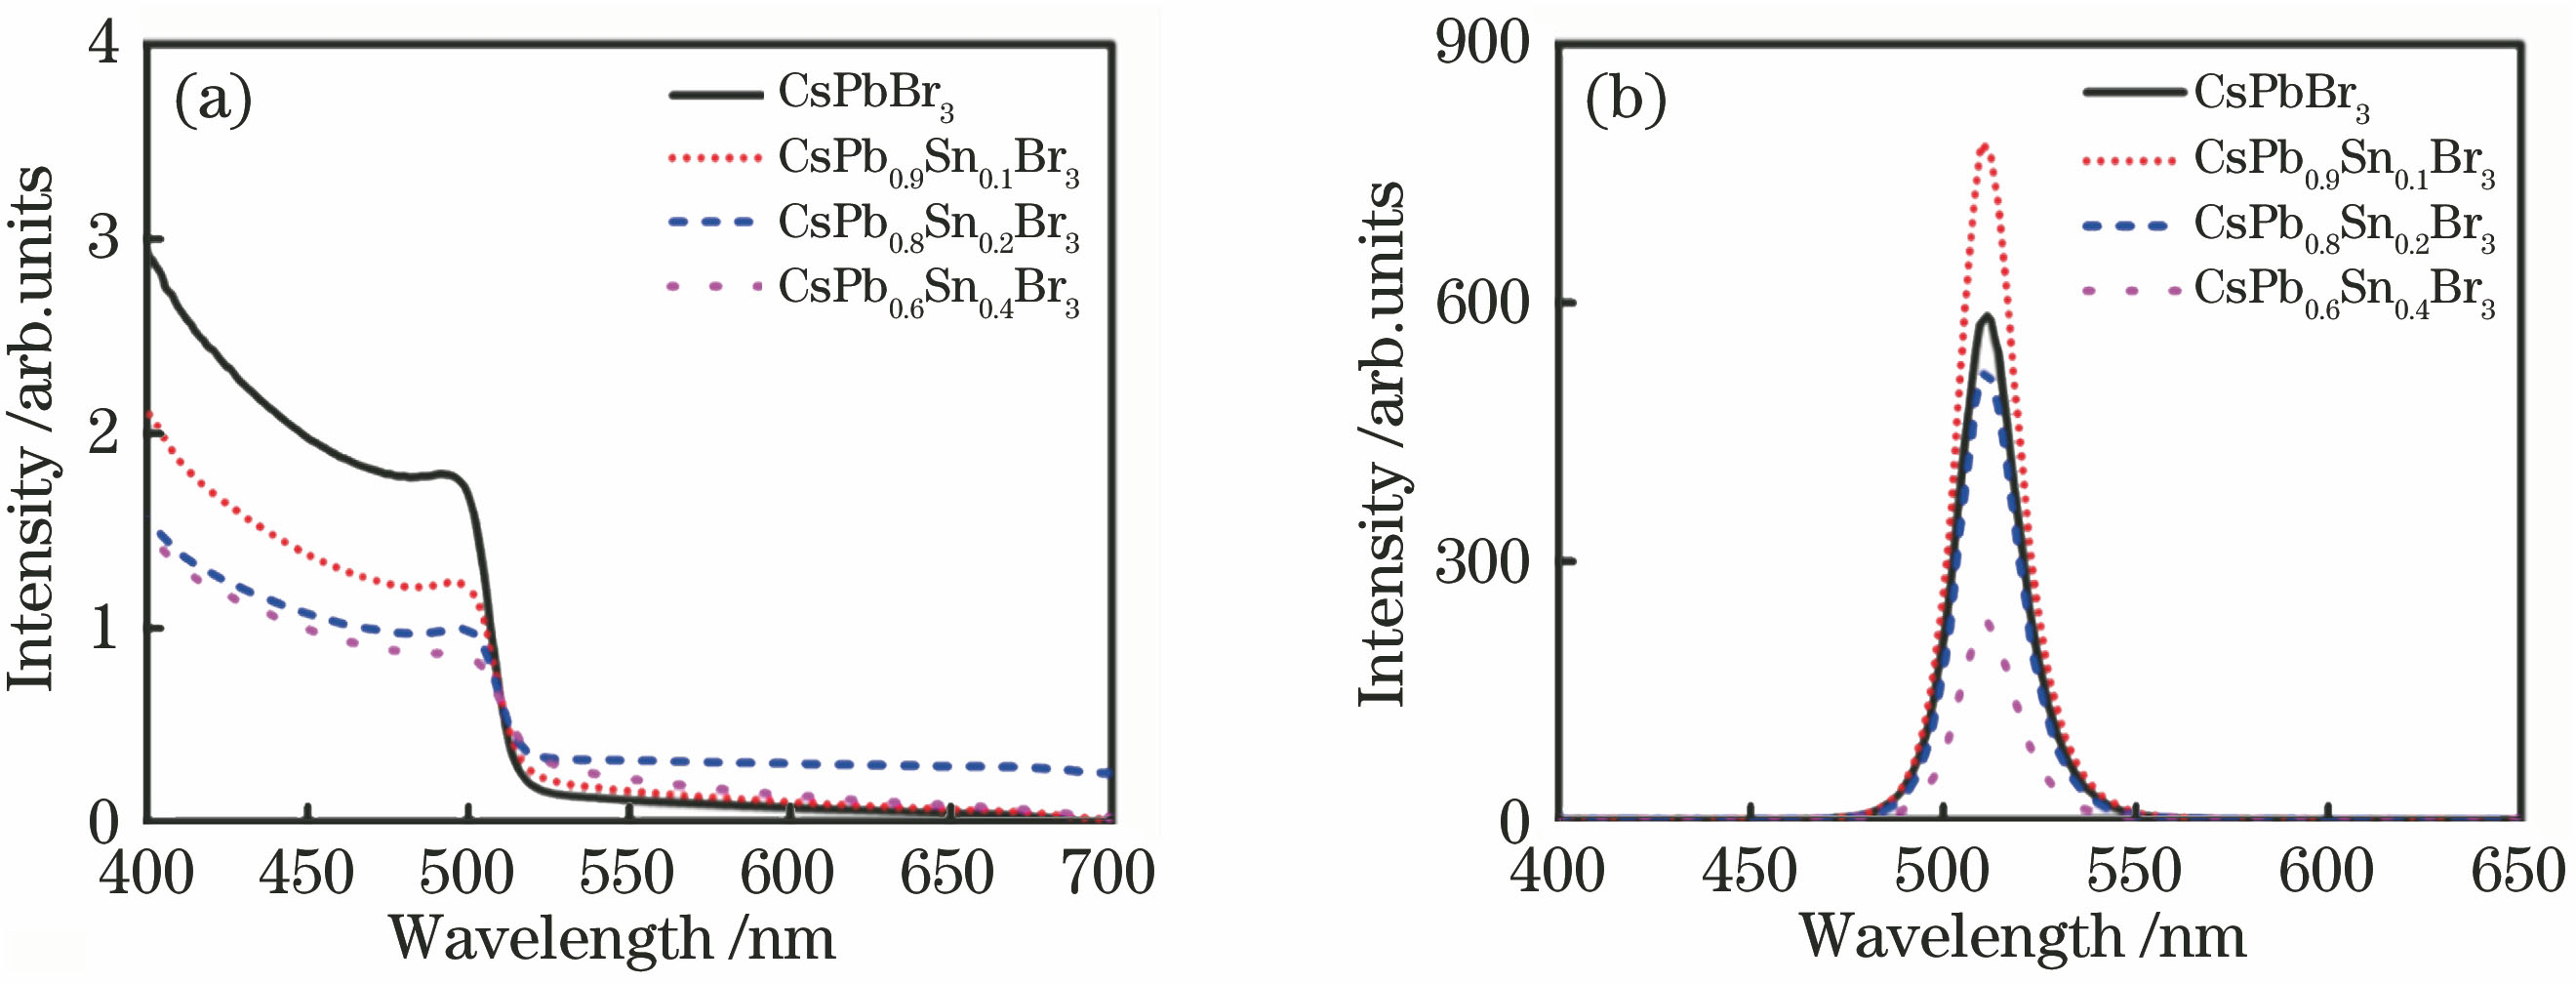 Absorption spectra and photoluminescence spectroscopy of CsPbBr3 and Sn-doped CsPbBr3 QDs. (a) Absorption spectra; (b) photoluminescence spectroscopy